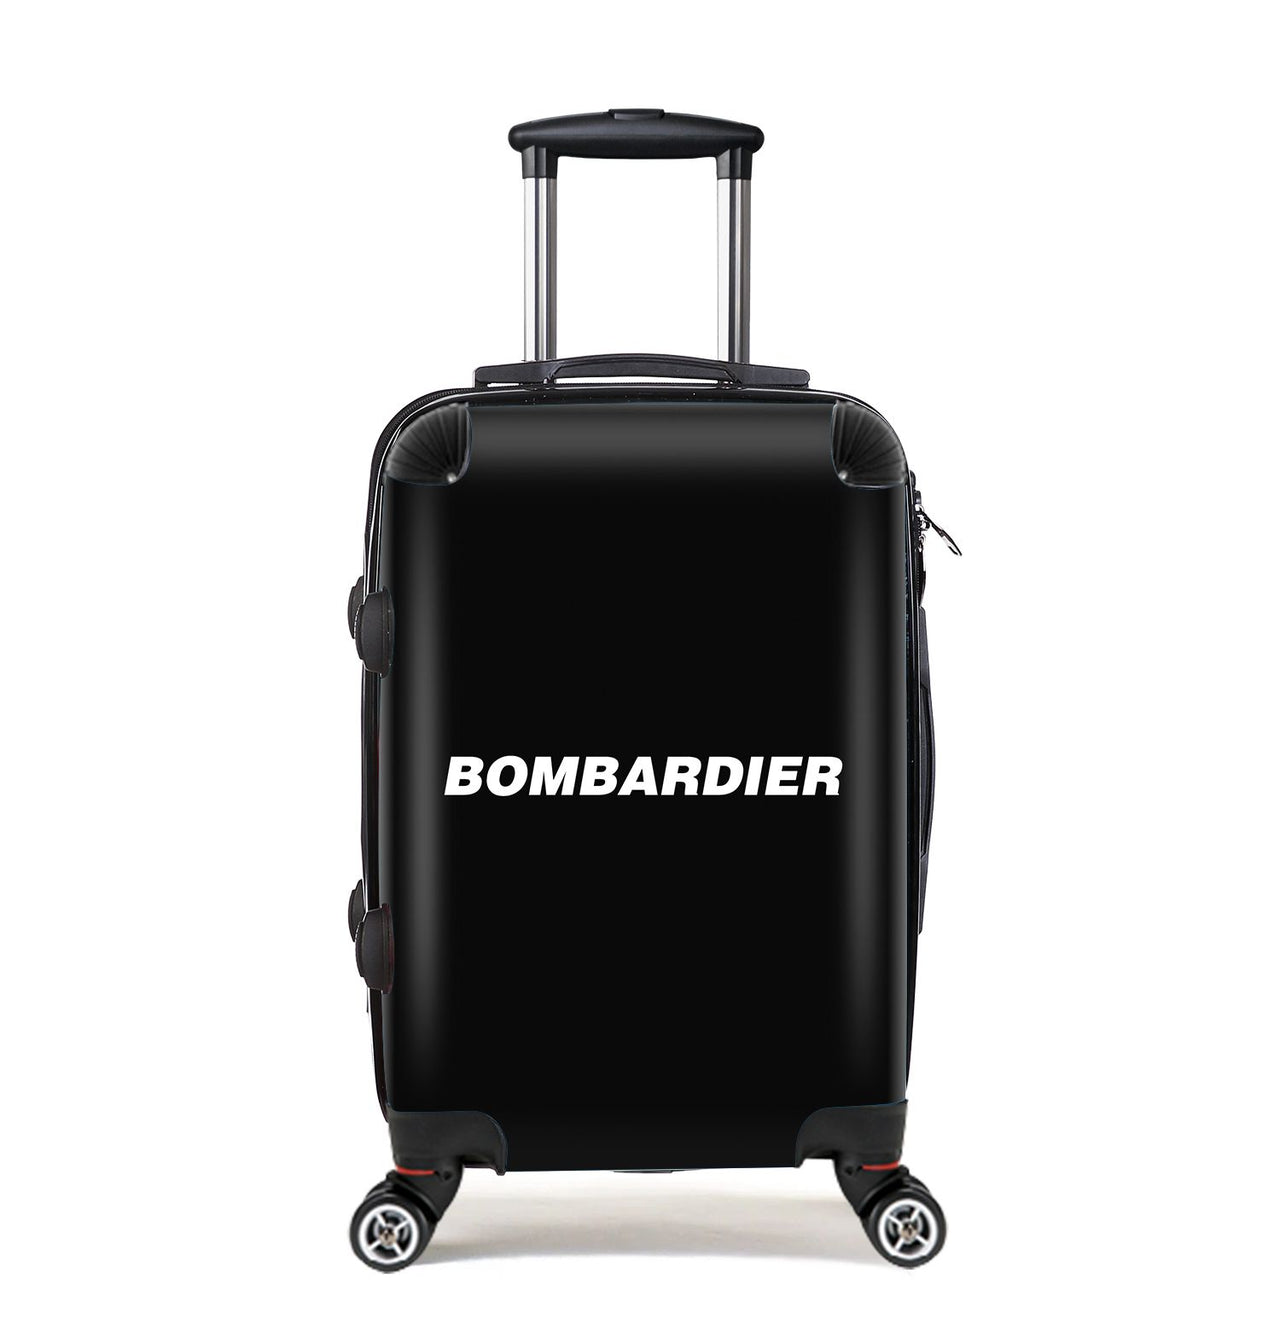 Bombardier & Text Designed Cabin Size Luggages